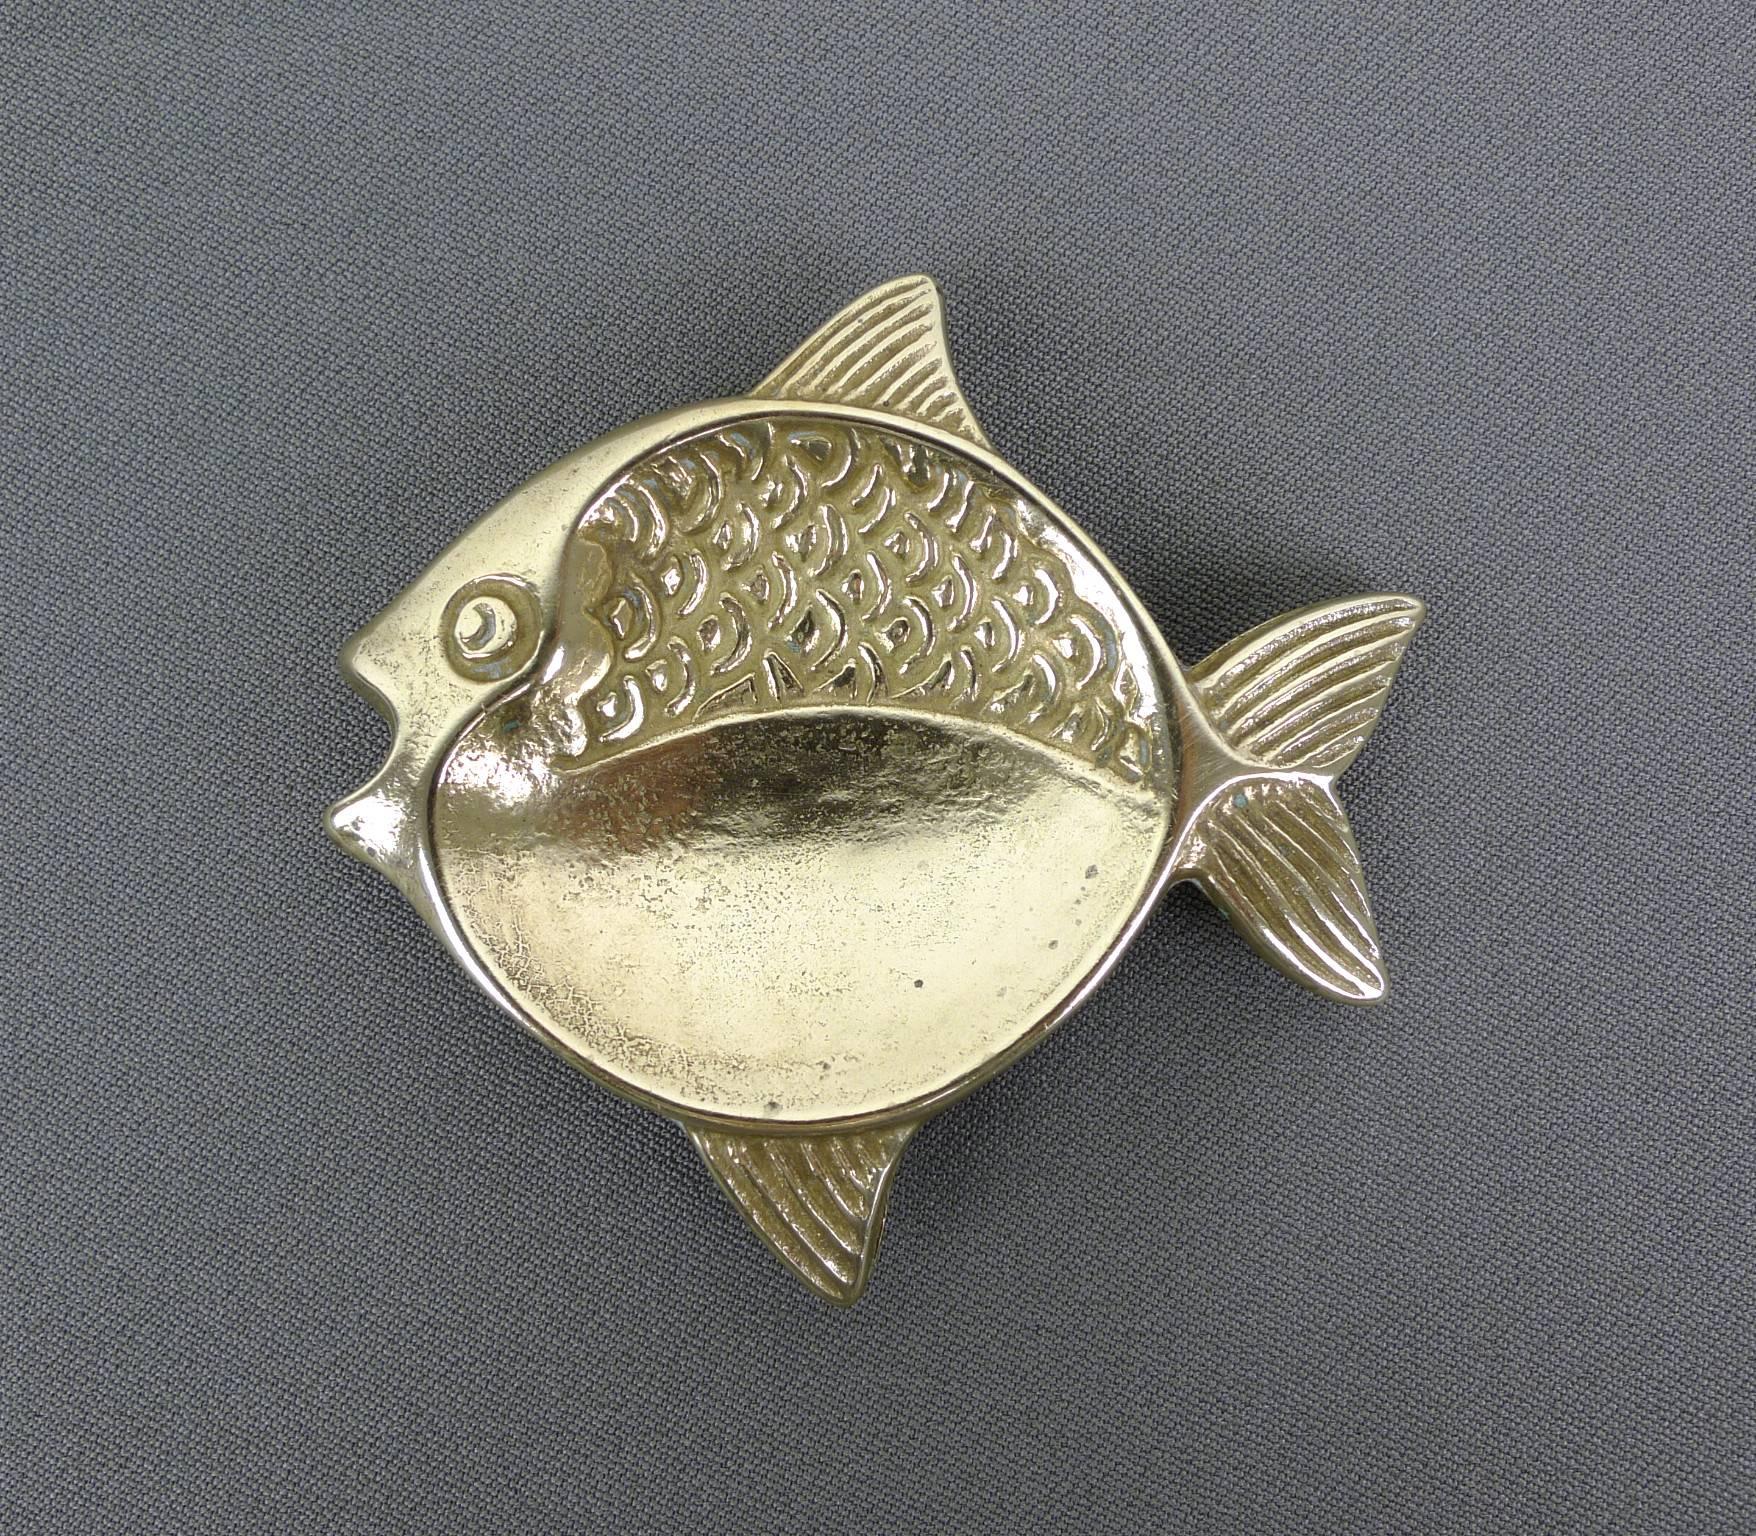 Set of two small brass ashtrays in the shape of a fish. They were made in the 1950s in Germany.
Both are in very good condition.